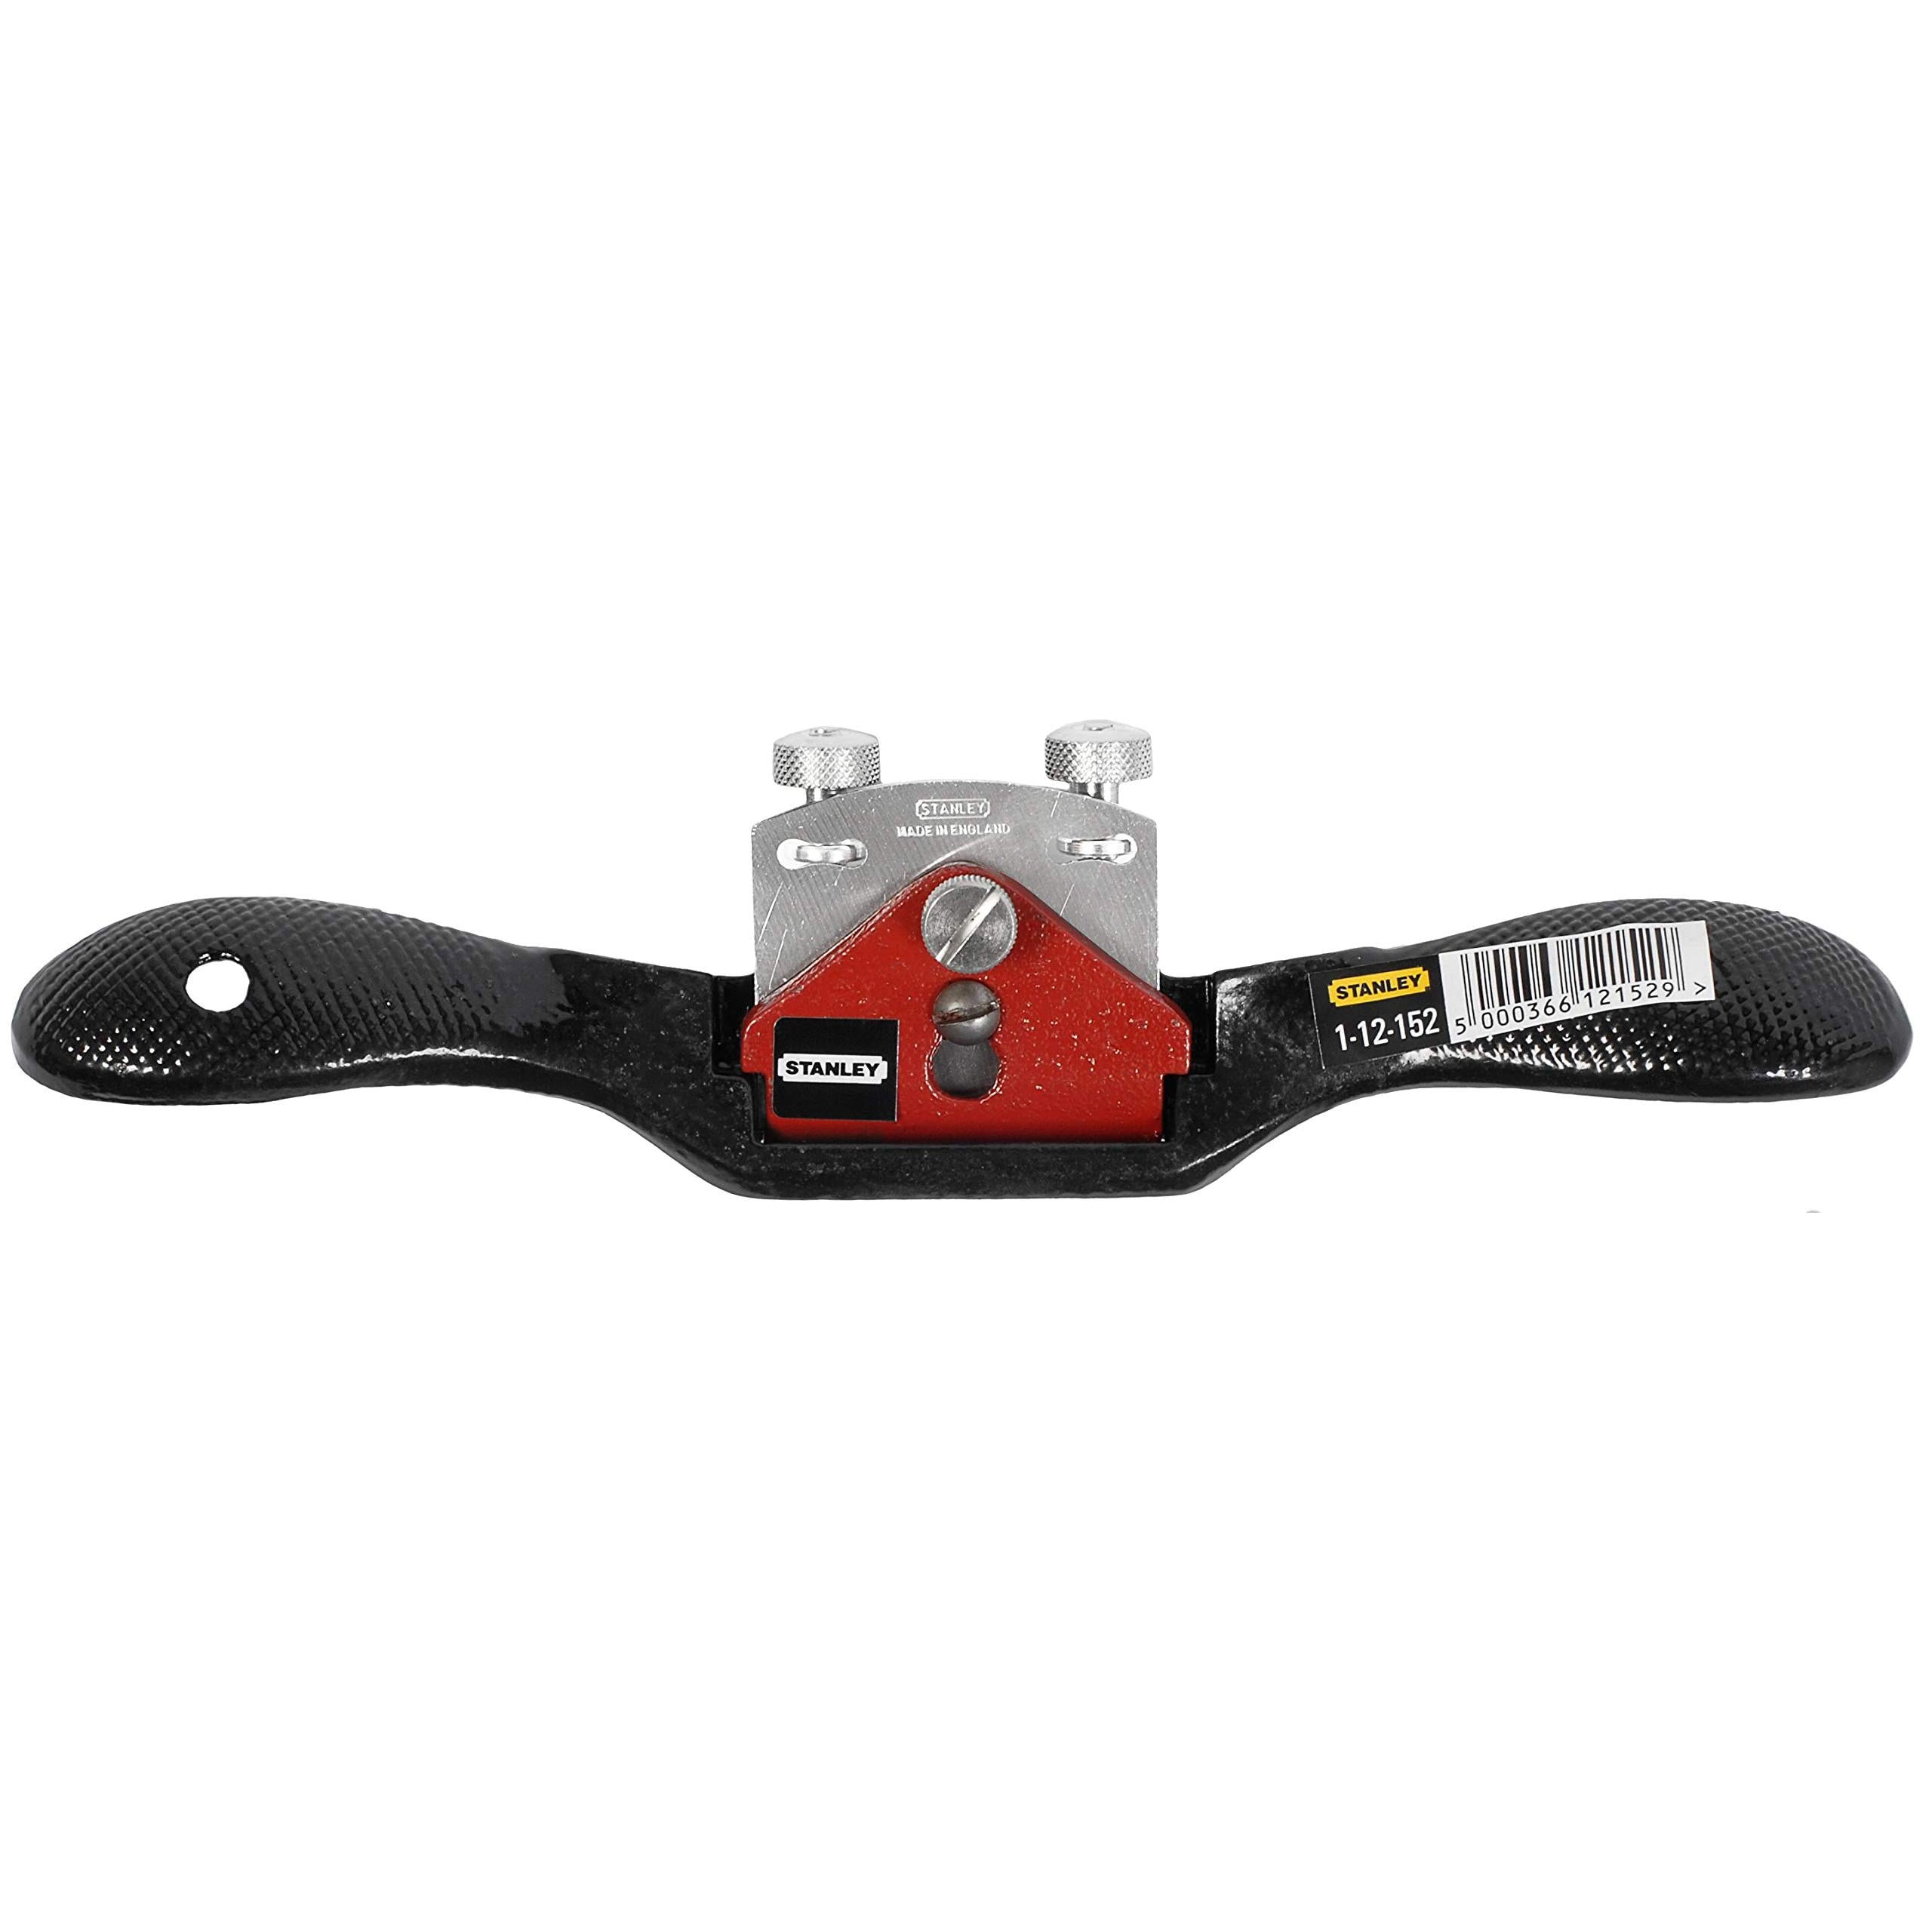 Stanley Stanley Round Spokeshave 151R 1-12-152 Power Tool Services